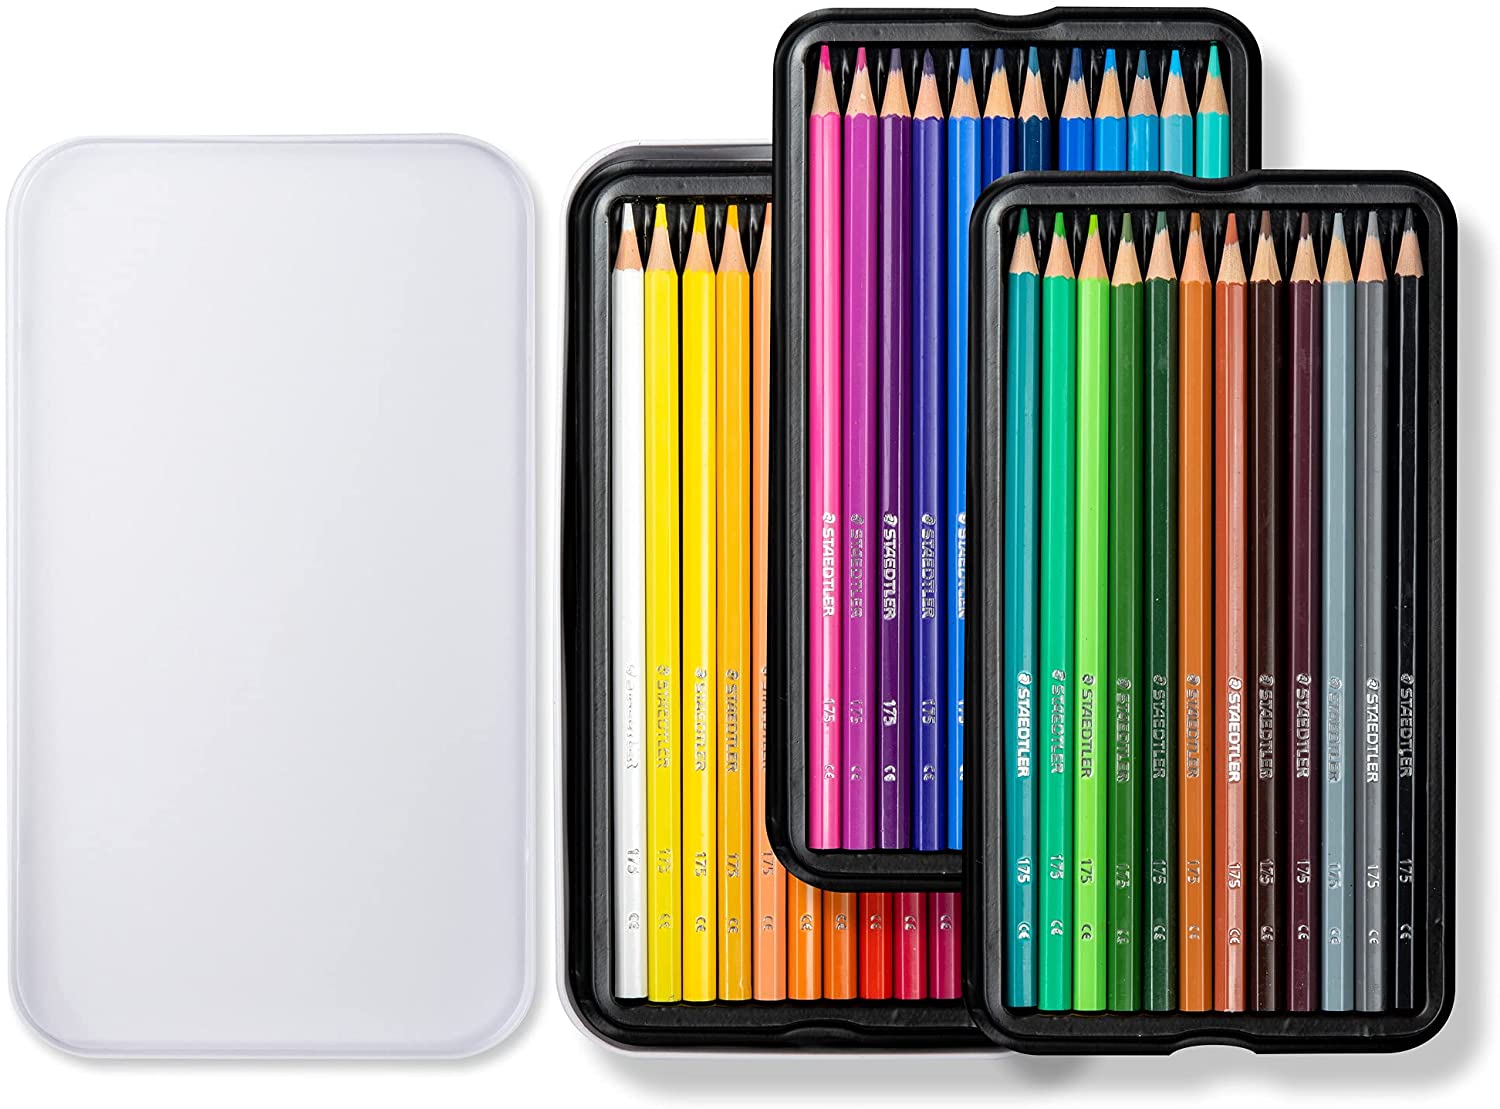 STAEDTLER 175 M72 Coloured Pencils, Assorted Colour, Pack of 72